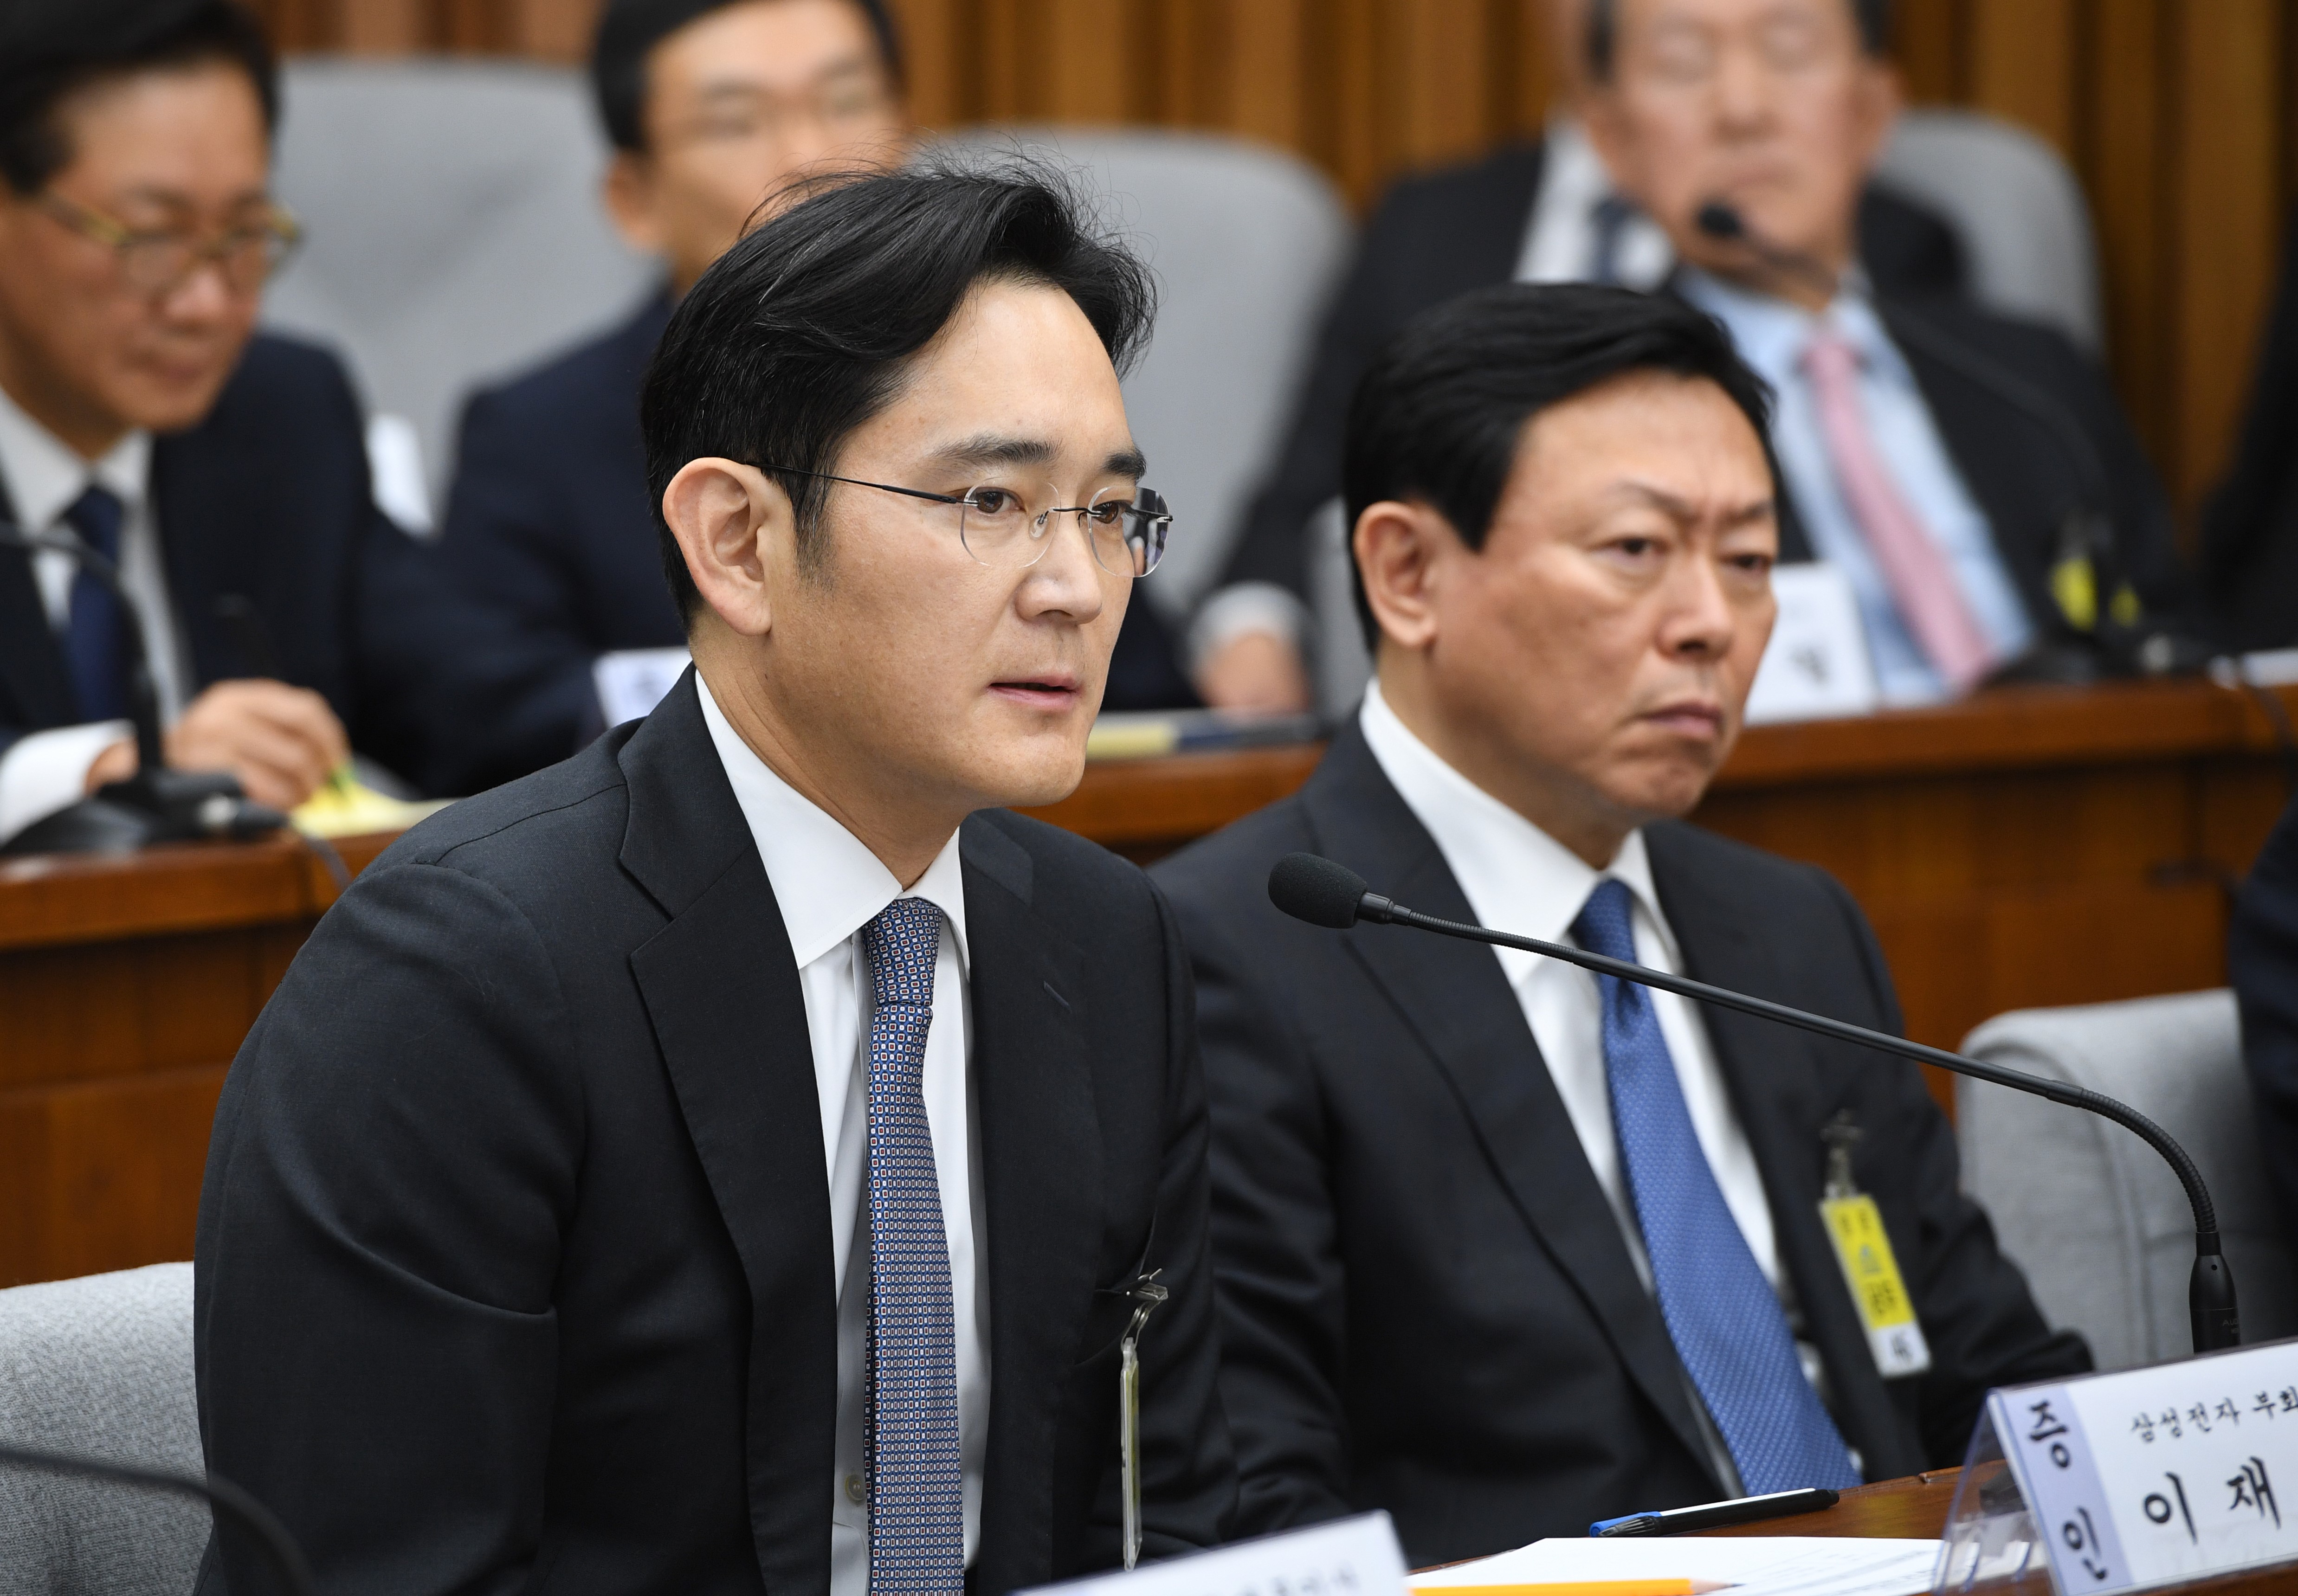 Samsung Group's heir-apparent Lee Jae-Yong (L) answers a question as Lotte Group Chairman Shin Dong-Bin (R) listens to during a parliamentary probe into a scandal engulfing President Park Geun-Hye at the National Assembly in Seoul on December 6, 2016.  The publicity-shy heads of South Korea's largest conglomerates faced their worst nightmare on December 6, as they were publicly grilled about possible corrupt practises before an audience of millions. / AFP PHOTO / POOL / JUNG YEON-JE